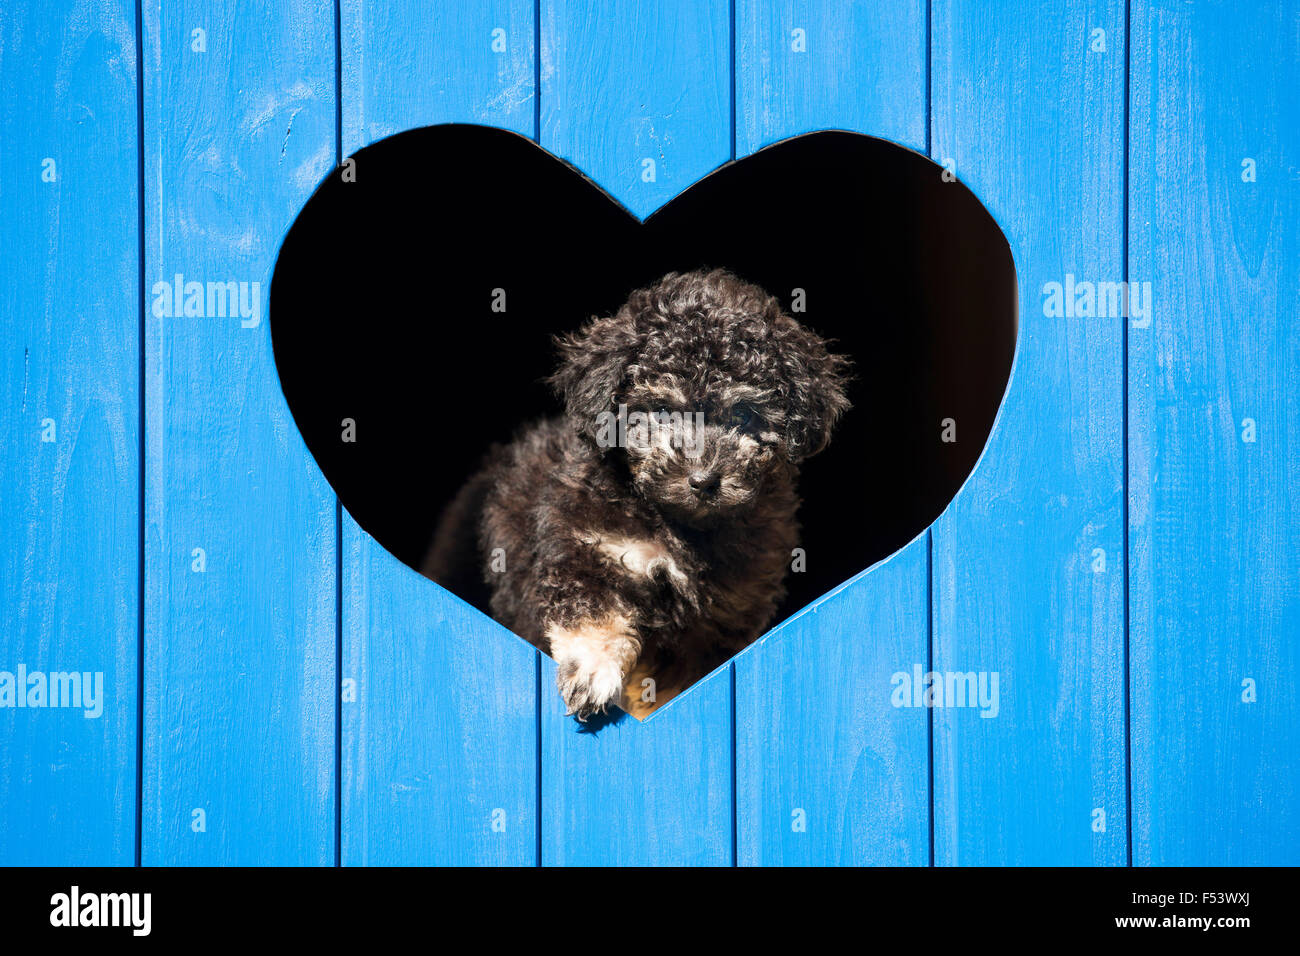 Toypudel, Welpen, Black And Tan, Blick durch Herz in blau Holzwand Stockfoto